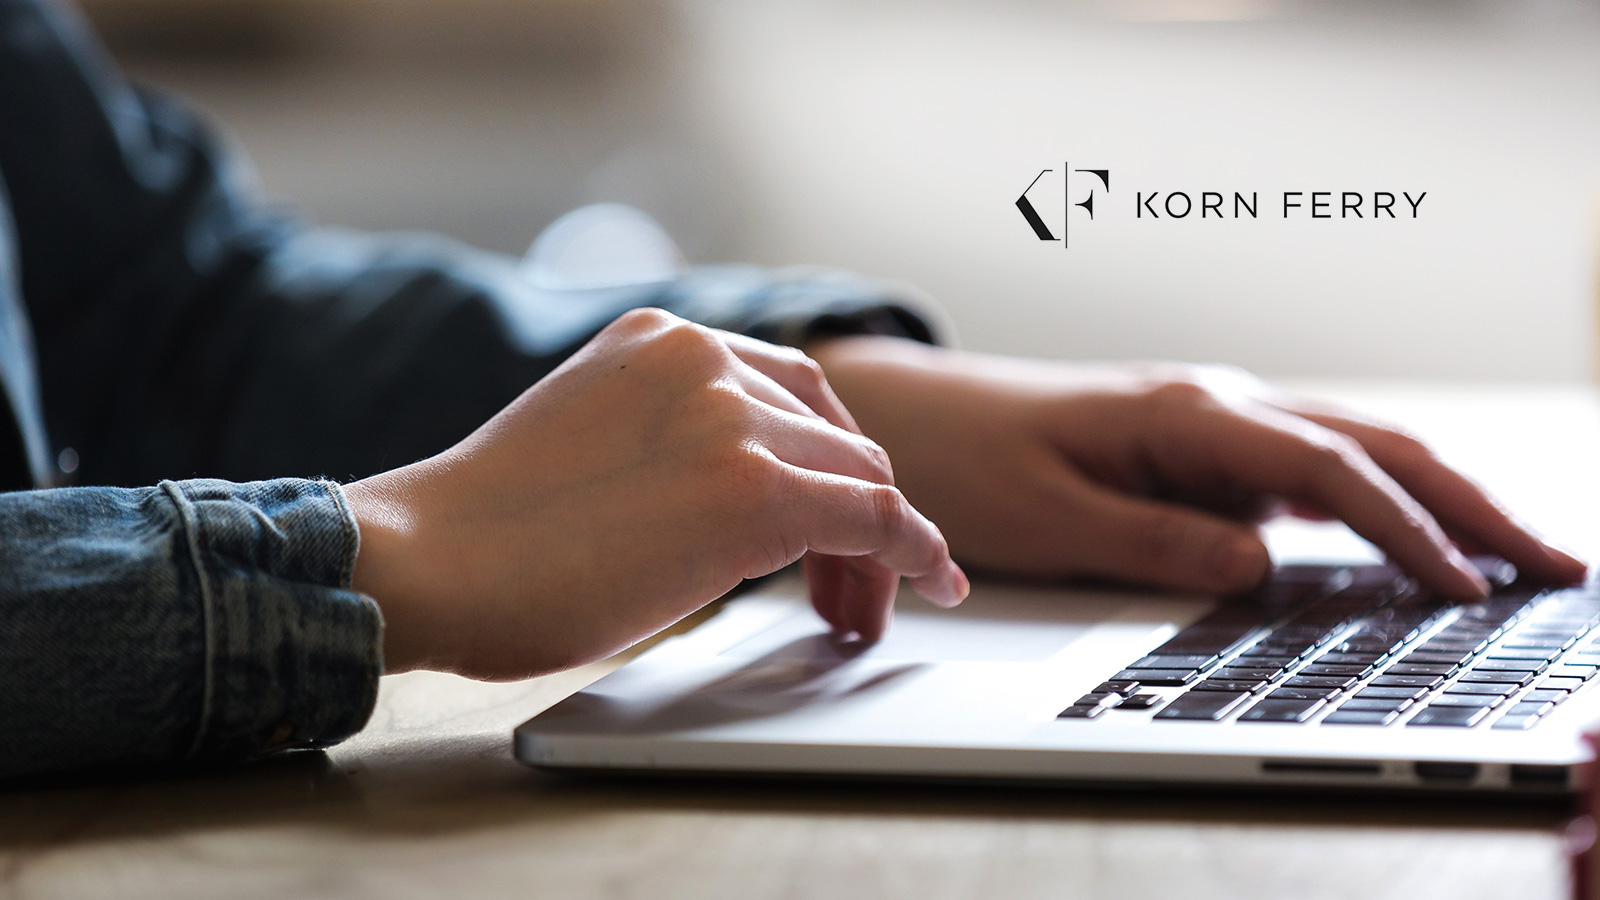 Korn Ferry Partners With University Of Miami To Offer New Career Tools